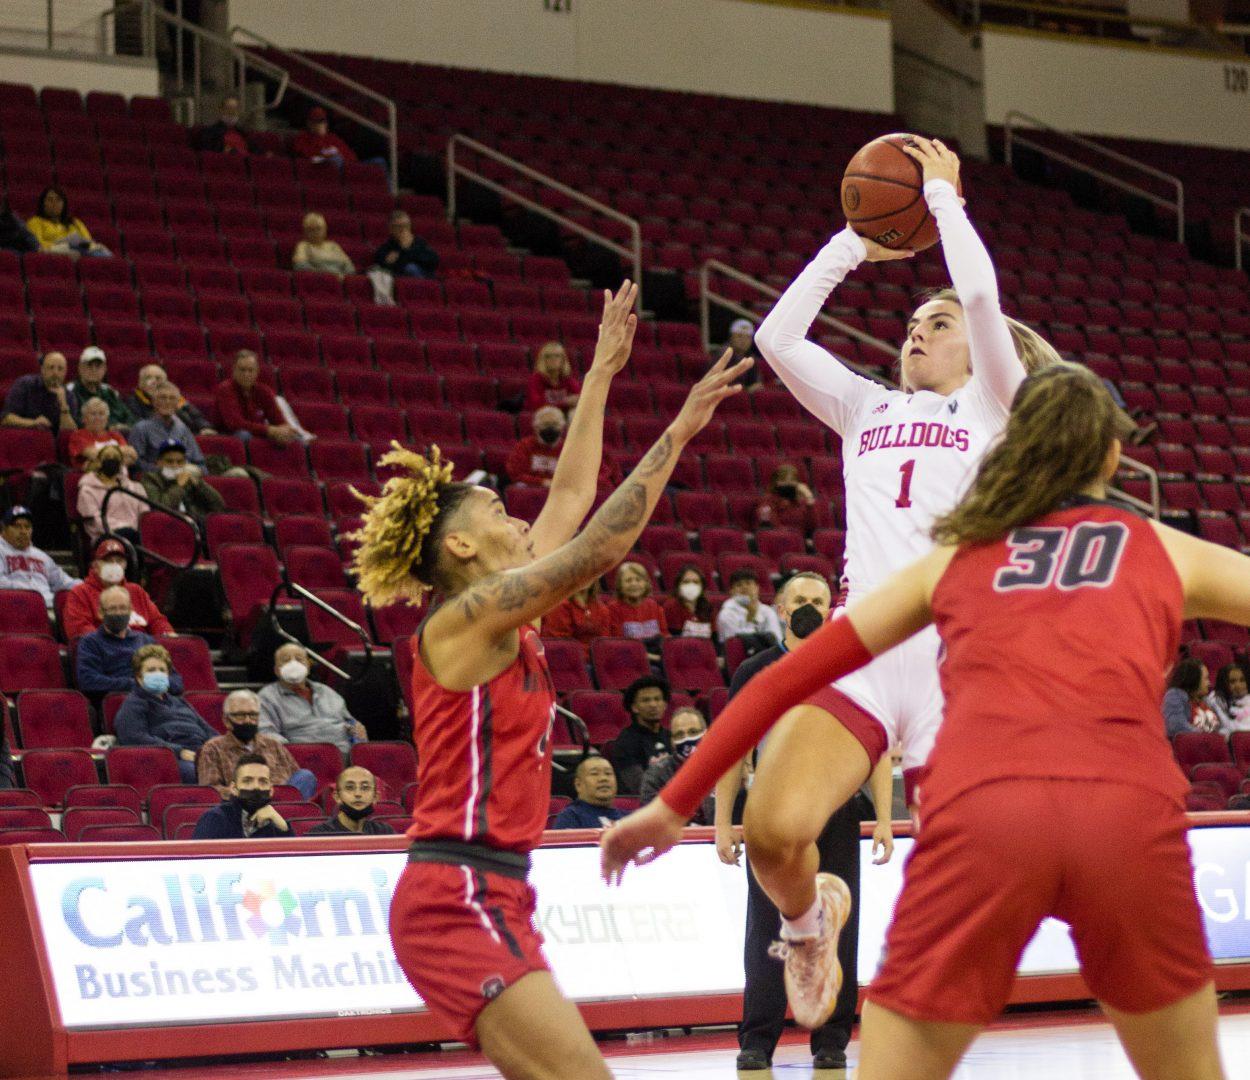 Haley Cavinder shoots the ball in the game against New Mexico on Feb. 23, 2022. (Julia Espinoza/ The Collegian)